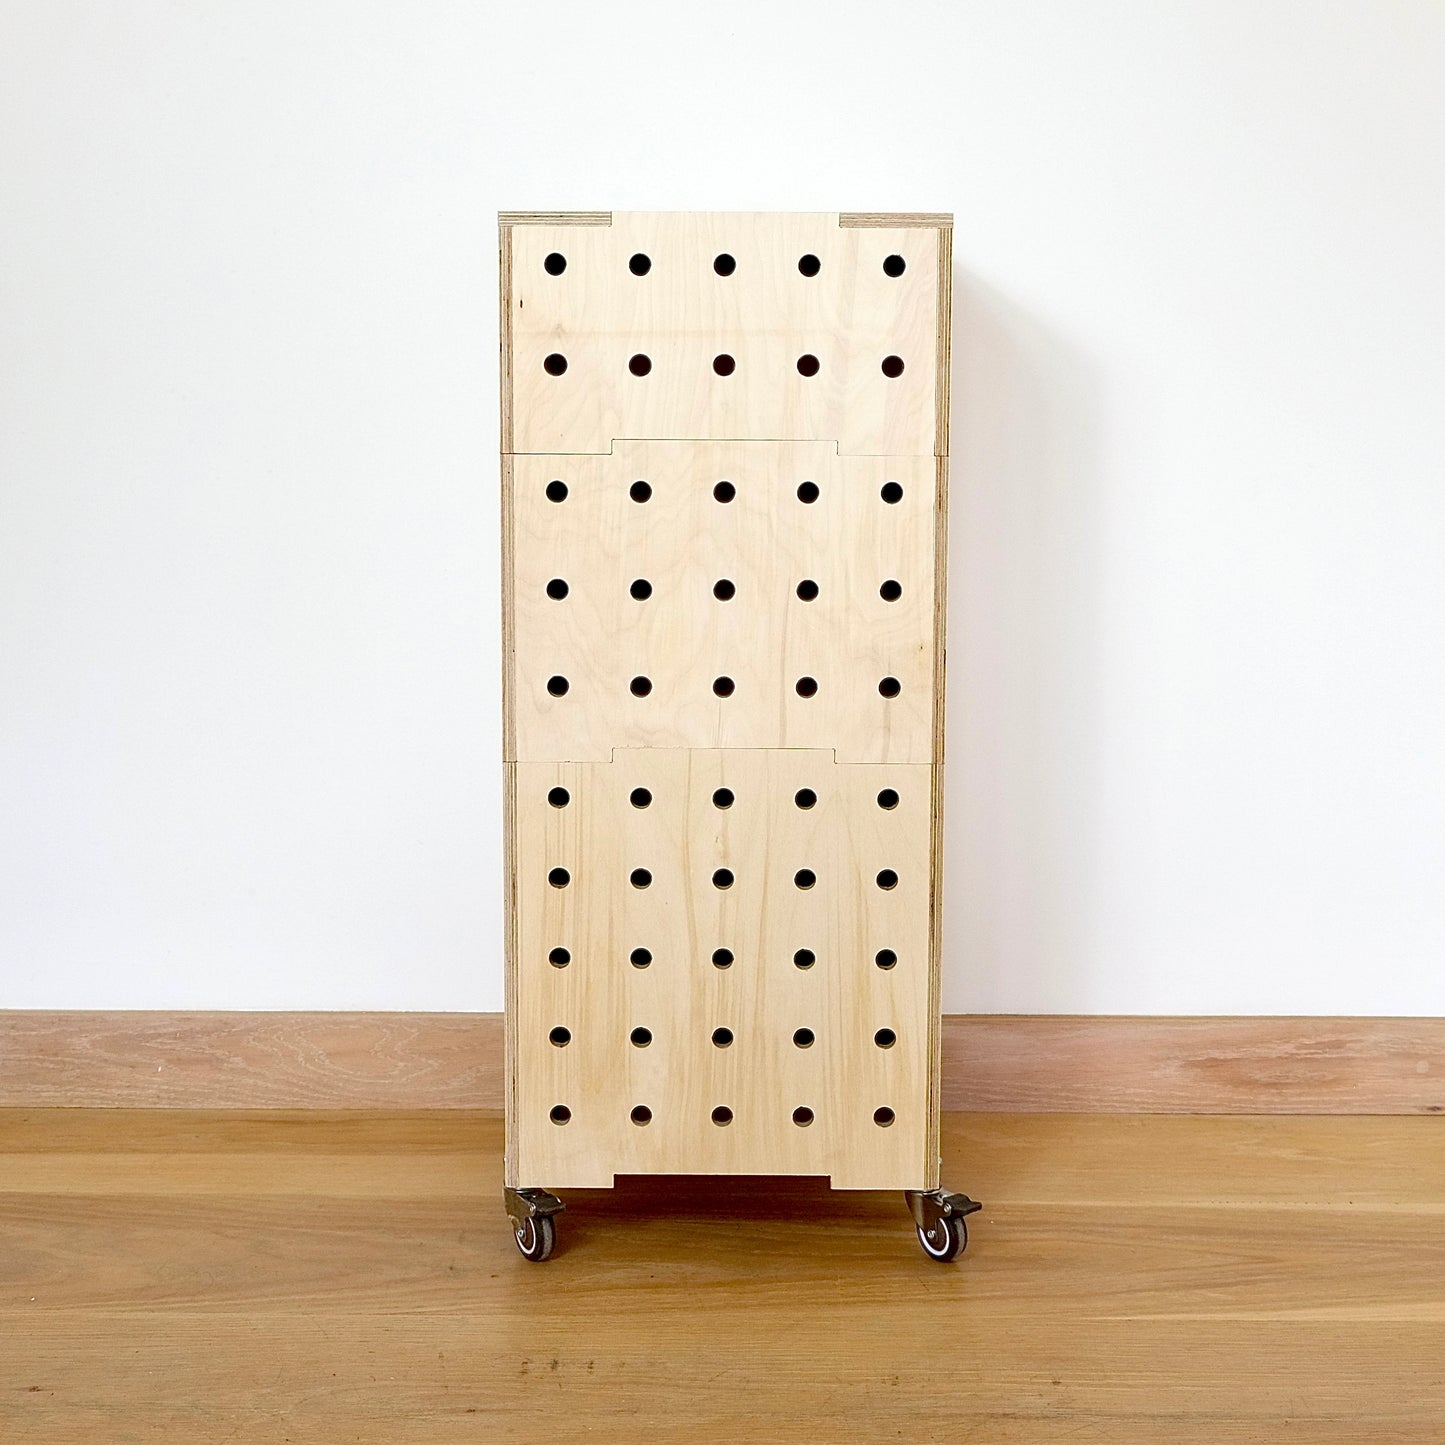 Birch plywood set of 3 stacking crates faces forward with 5 rows of vertical drill holes, 4 castors on base & wooden lid standing on a wood floor against a white wall.